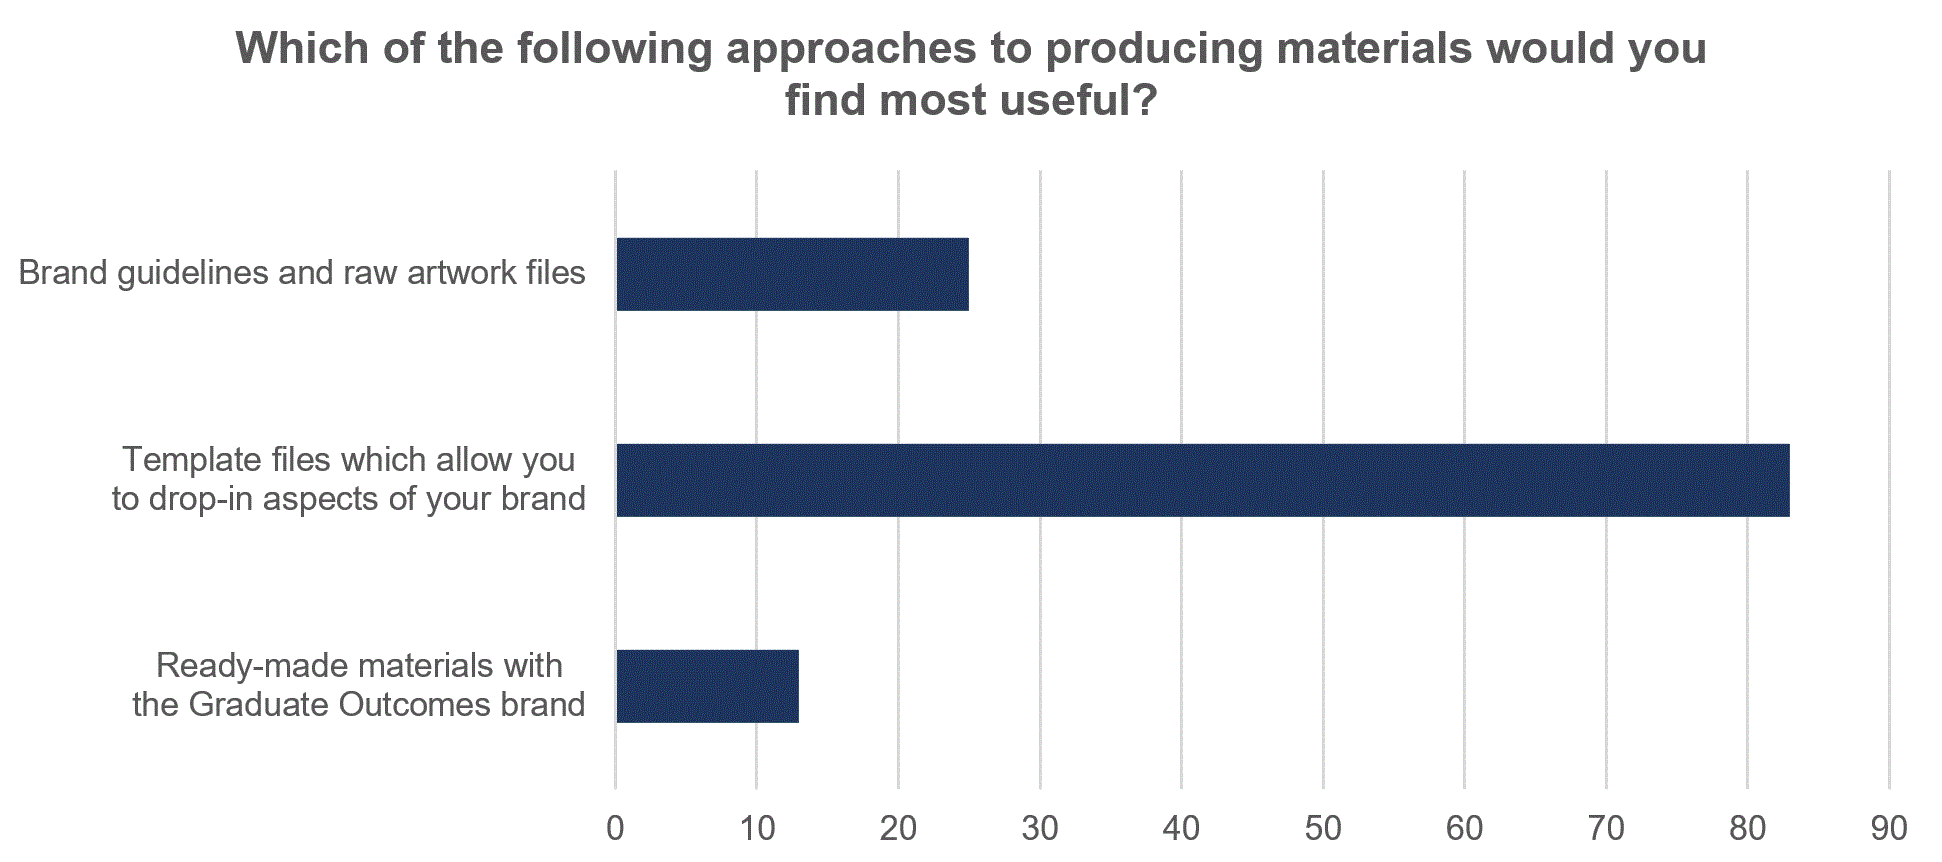 Chart 4 - Which of the following approaches to producing materials would you find most useful?